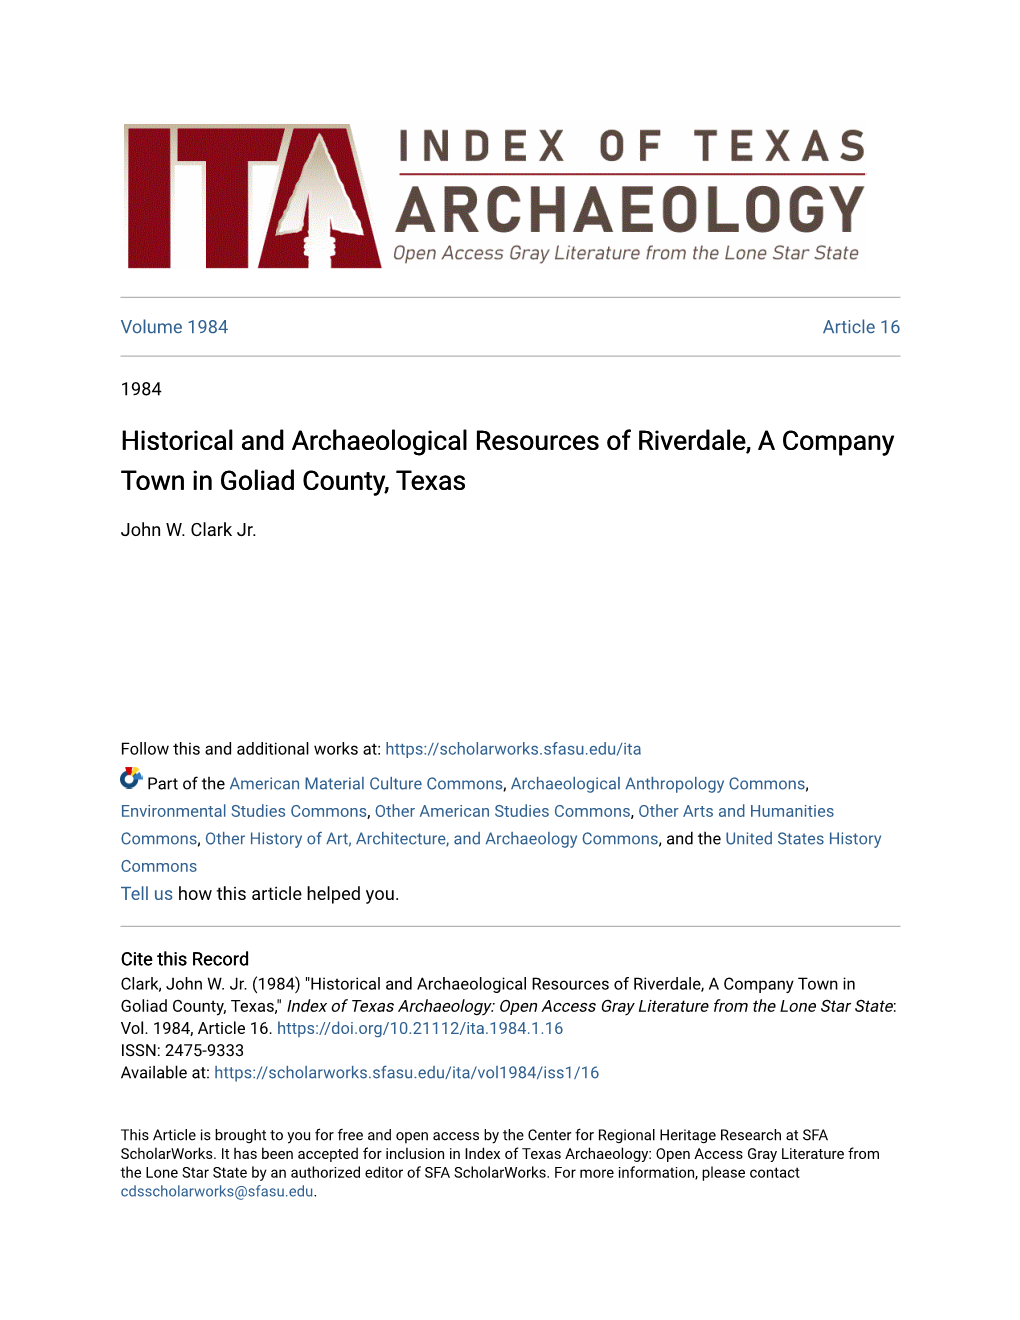 Historical and Archaeological Resources of Riverdale, a Company Town in Goliad County, Texas